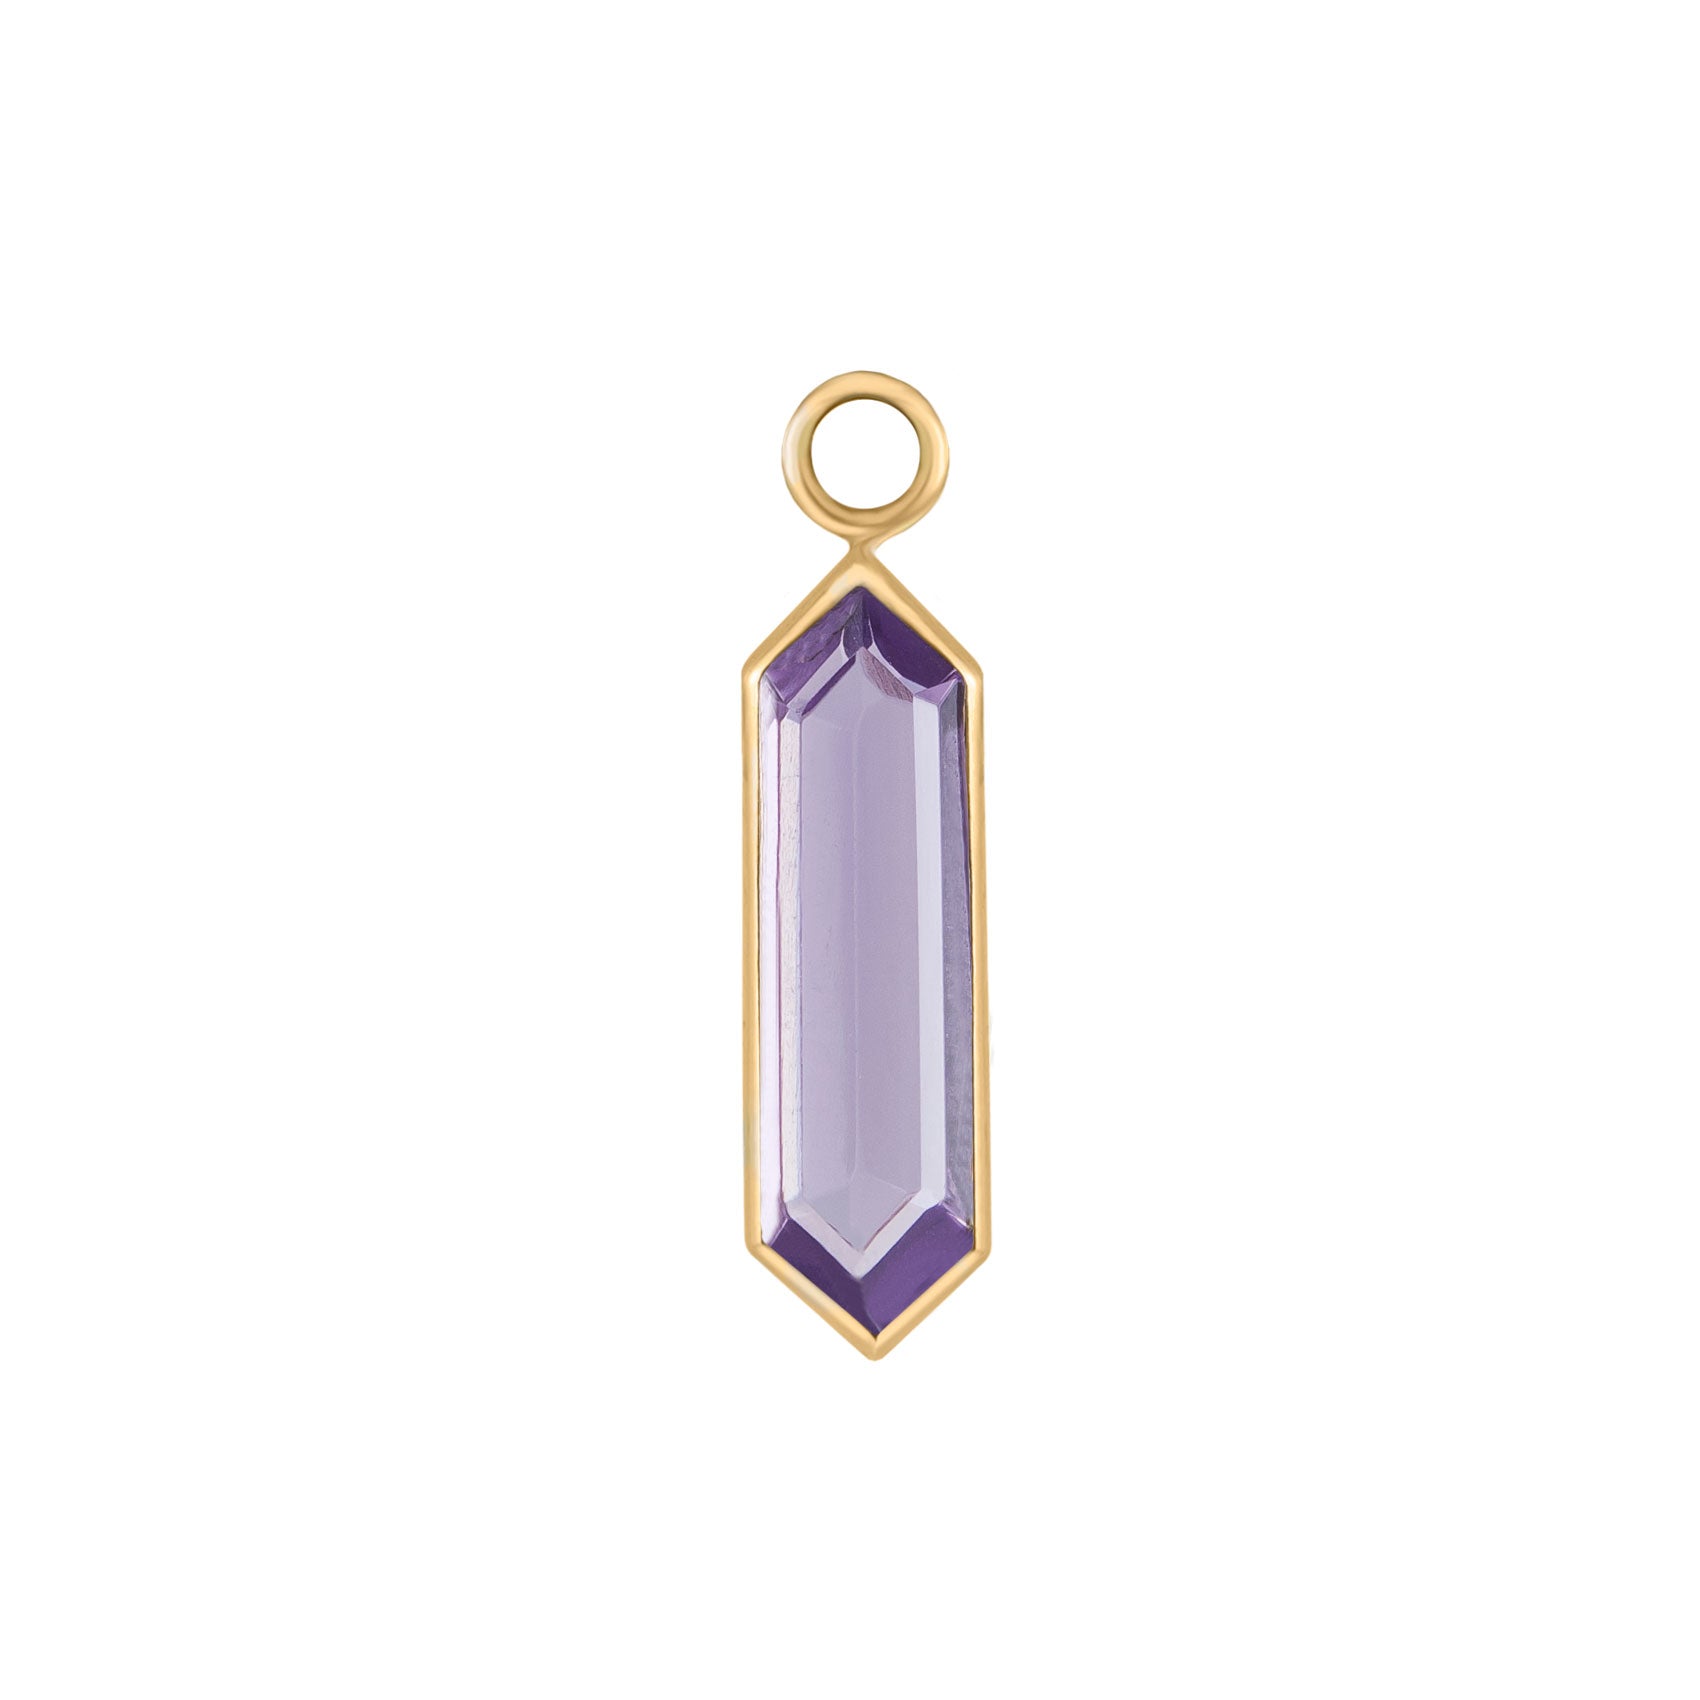 metier by tomfoolery 9ct yellow gold and purple amethyst hexa plaques.